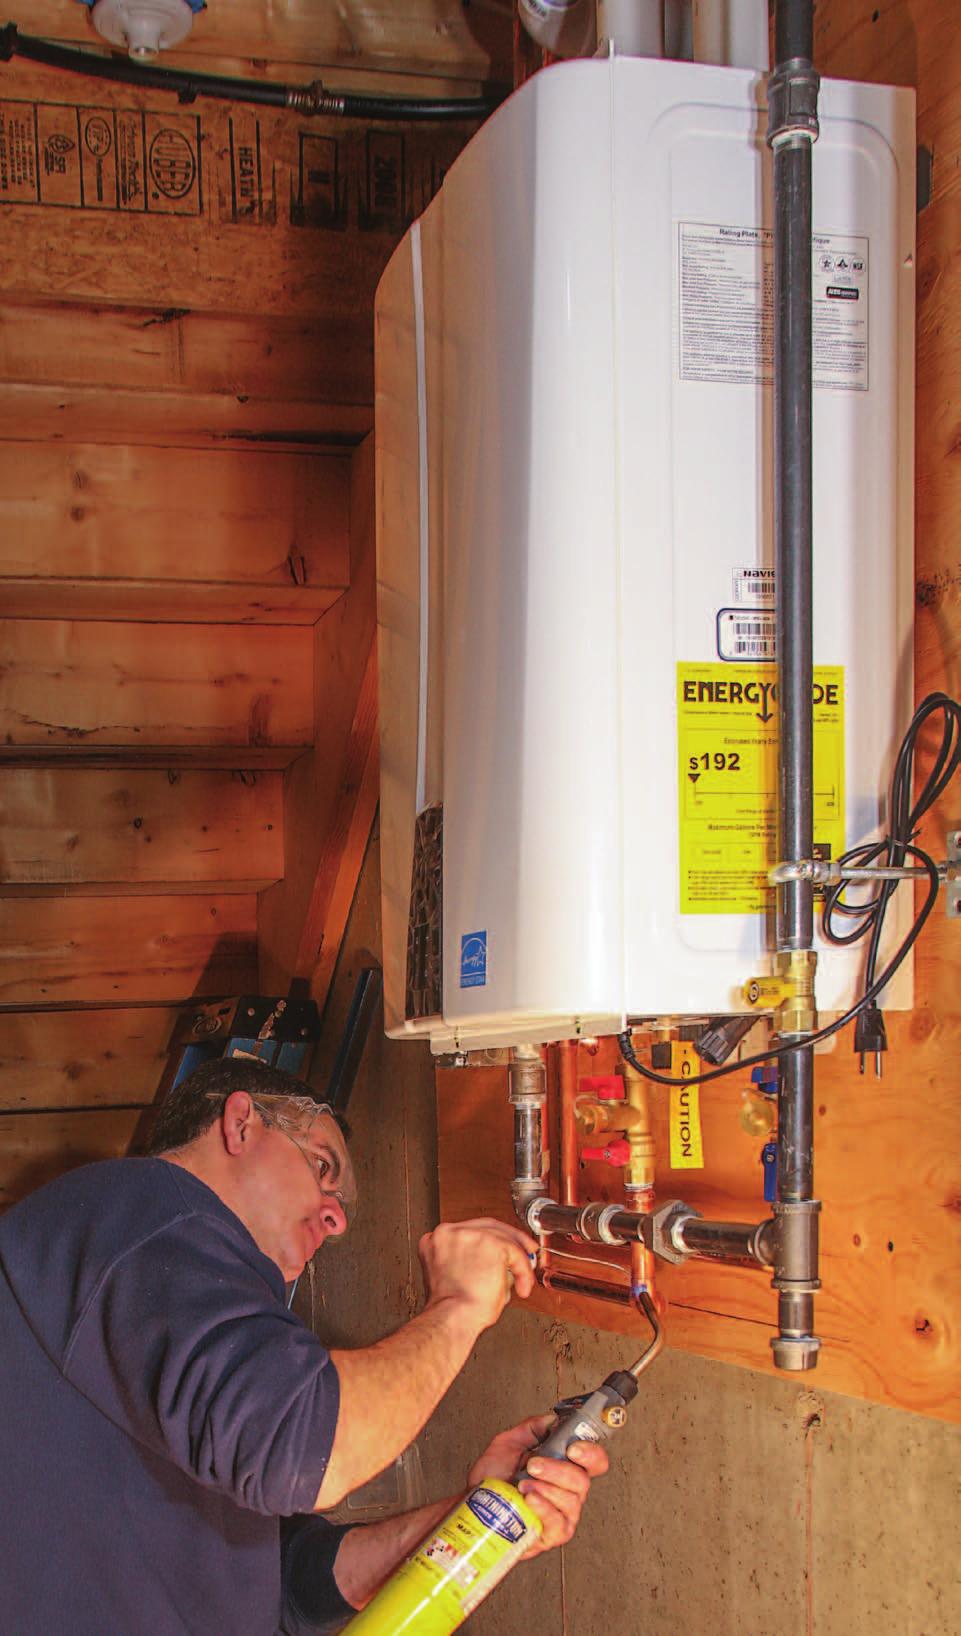 Installing an On-Demand Water Heater Pluses include endless hot water and a compact design, but the installation means a lot of pipes in a small space by Tom Cardillo Promising endless hot water and